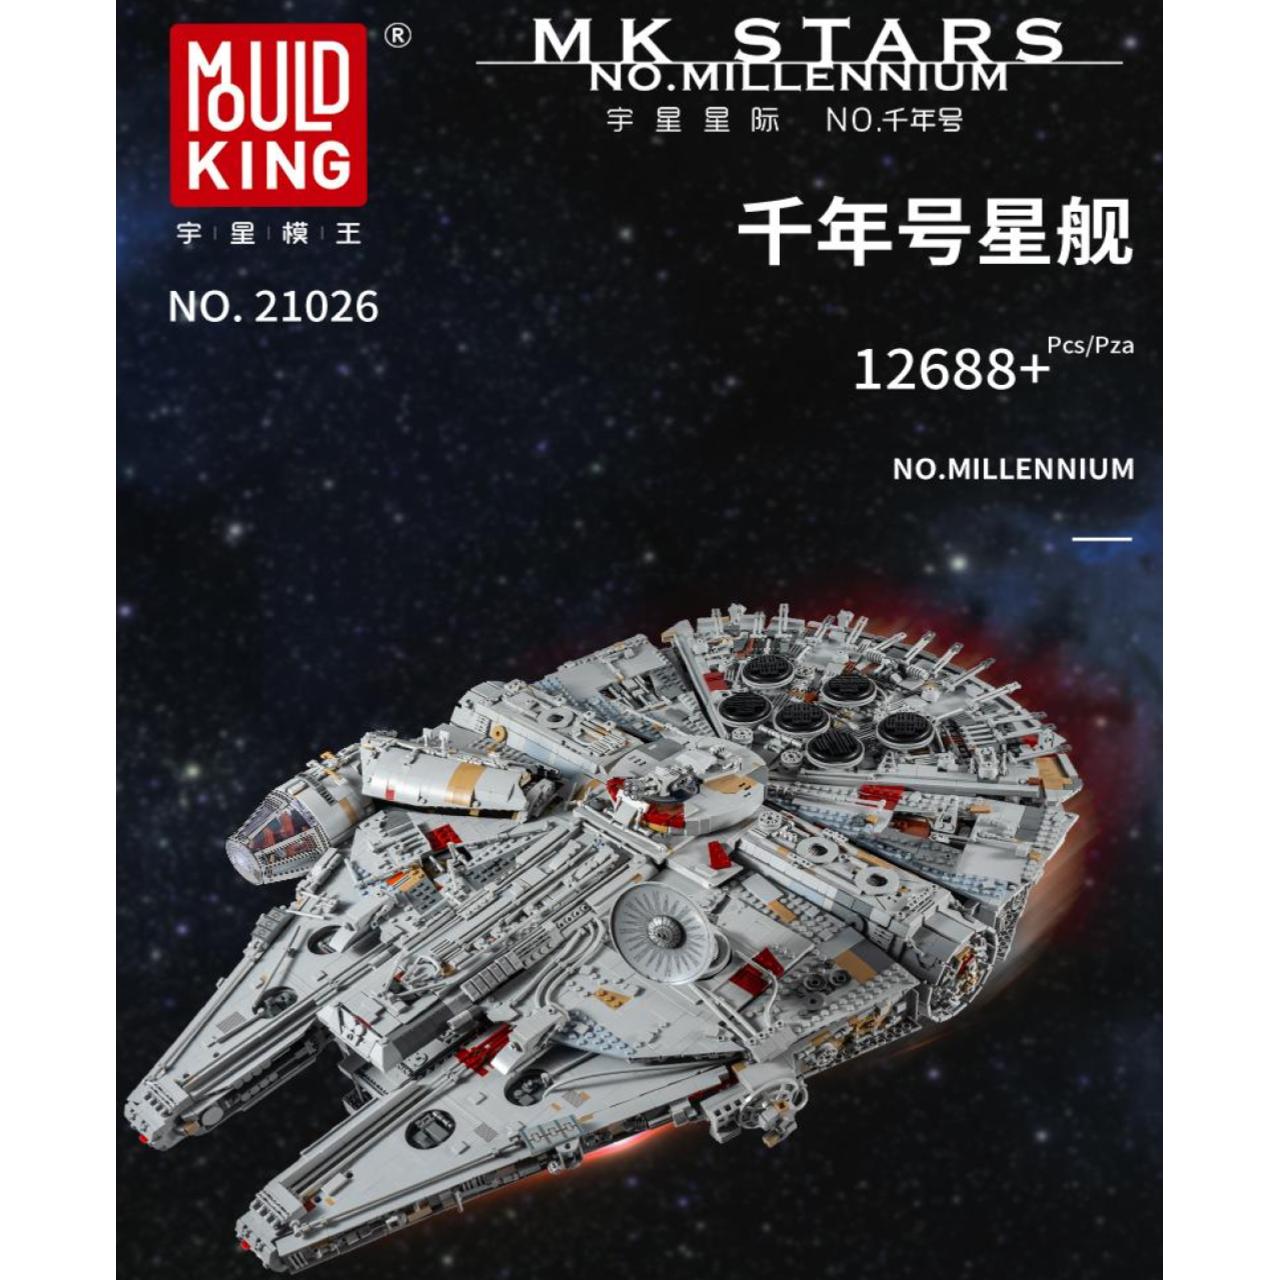 Mould King 21026 UCS Millennium Falcon with 12688 pieces 2 - LEPIN Germany